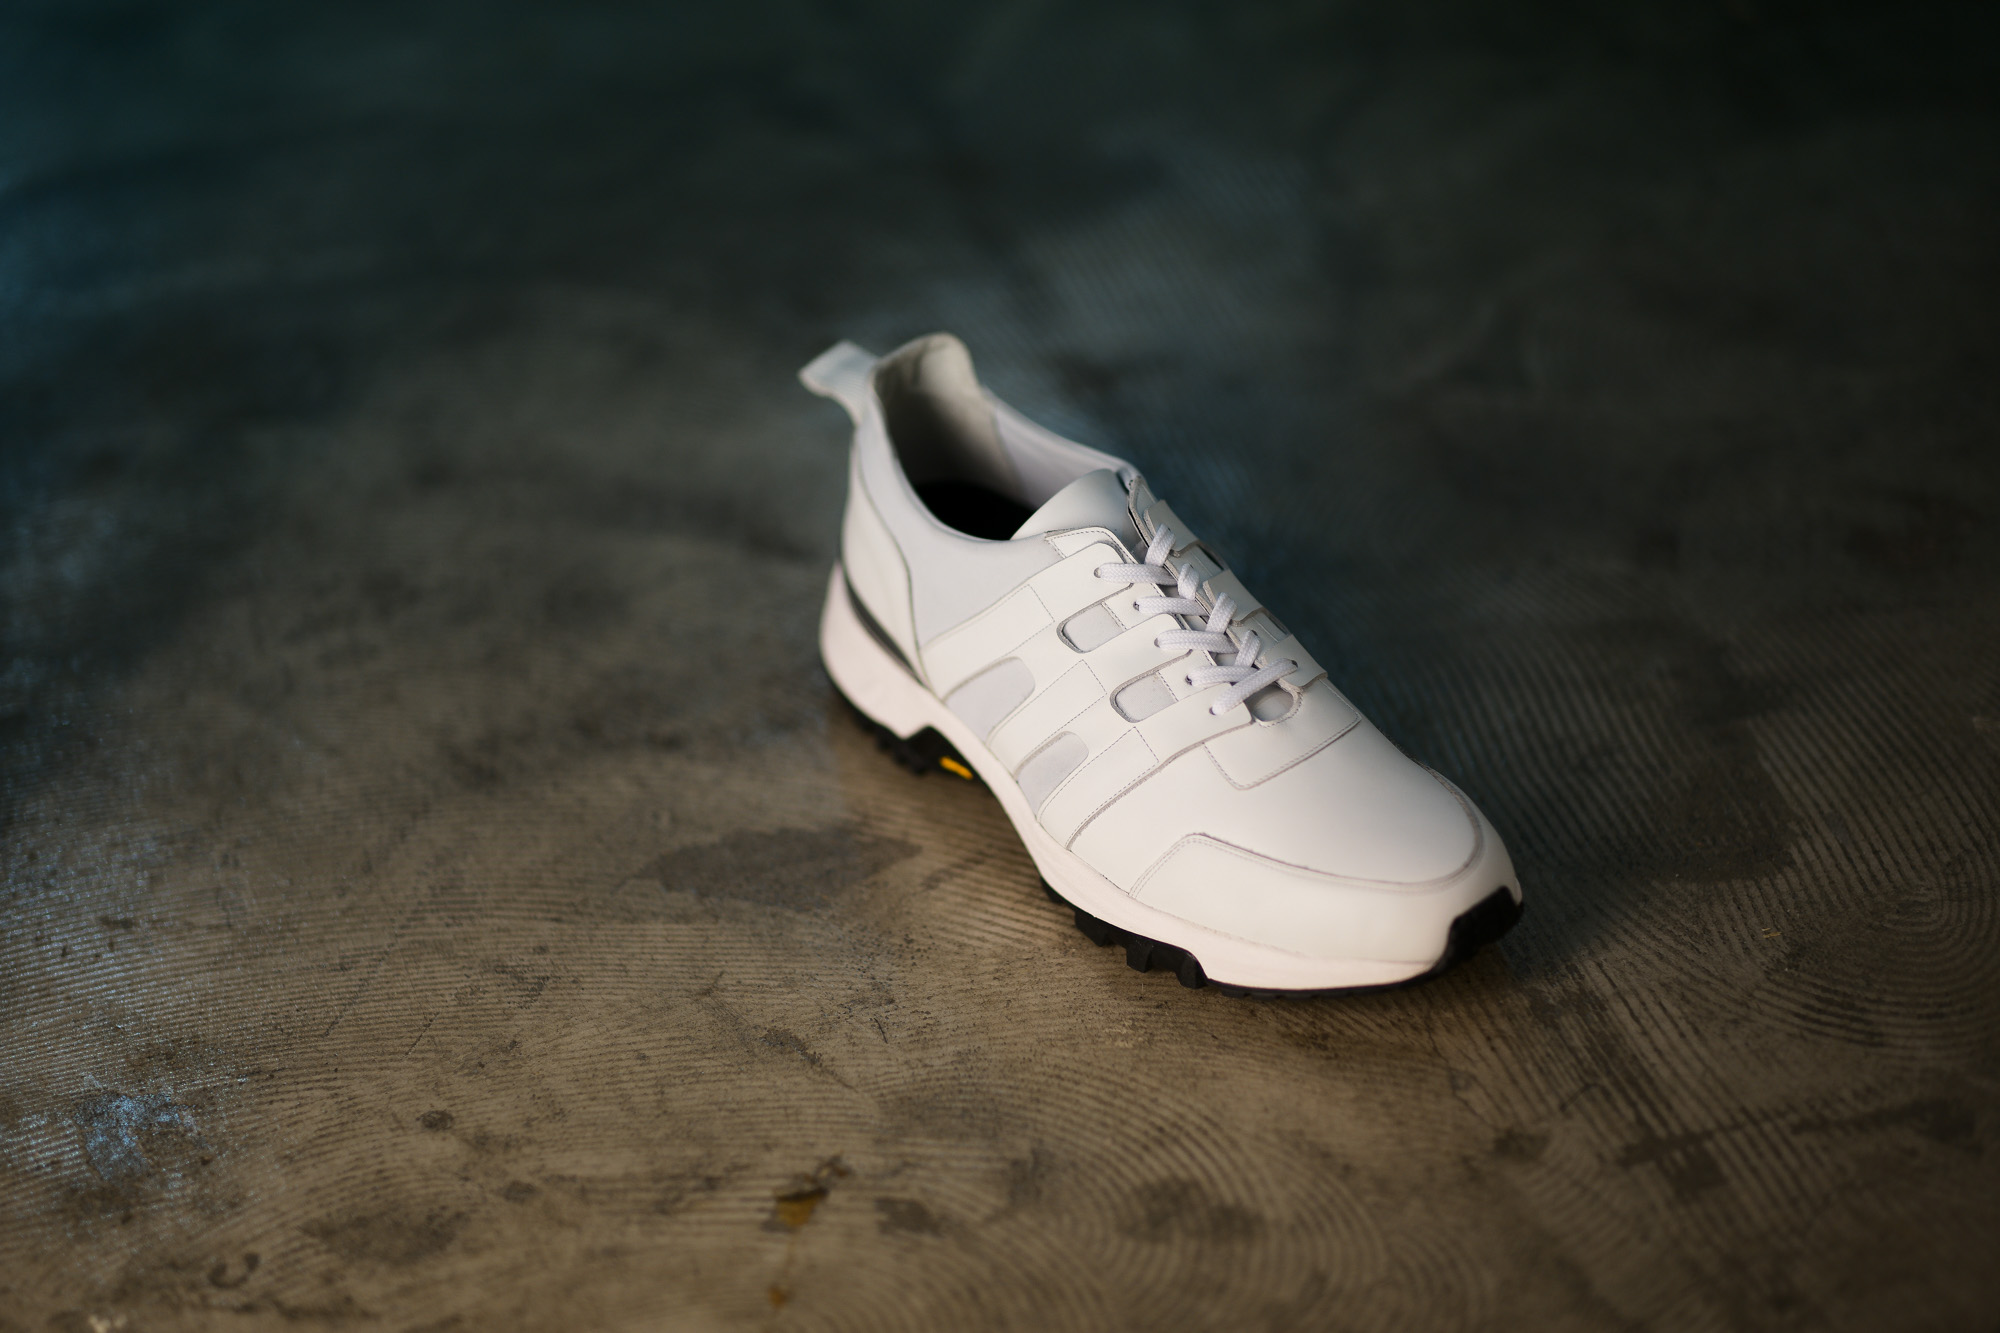 WH (ダブルエイチ) WH-0111 Faster Last(ファスターラスト) Sneakers スニーカー WHITE×WHITE (ホワイト×ホワイト) MADE IN JAPAN (日本製) 2019 秋冬【ご予約受付開始】 愛知 名古屋 alto e diritto altoediritto アルトエデリット